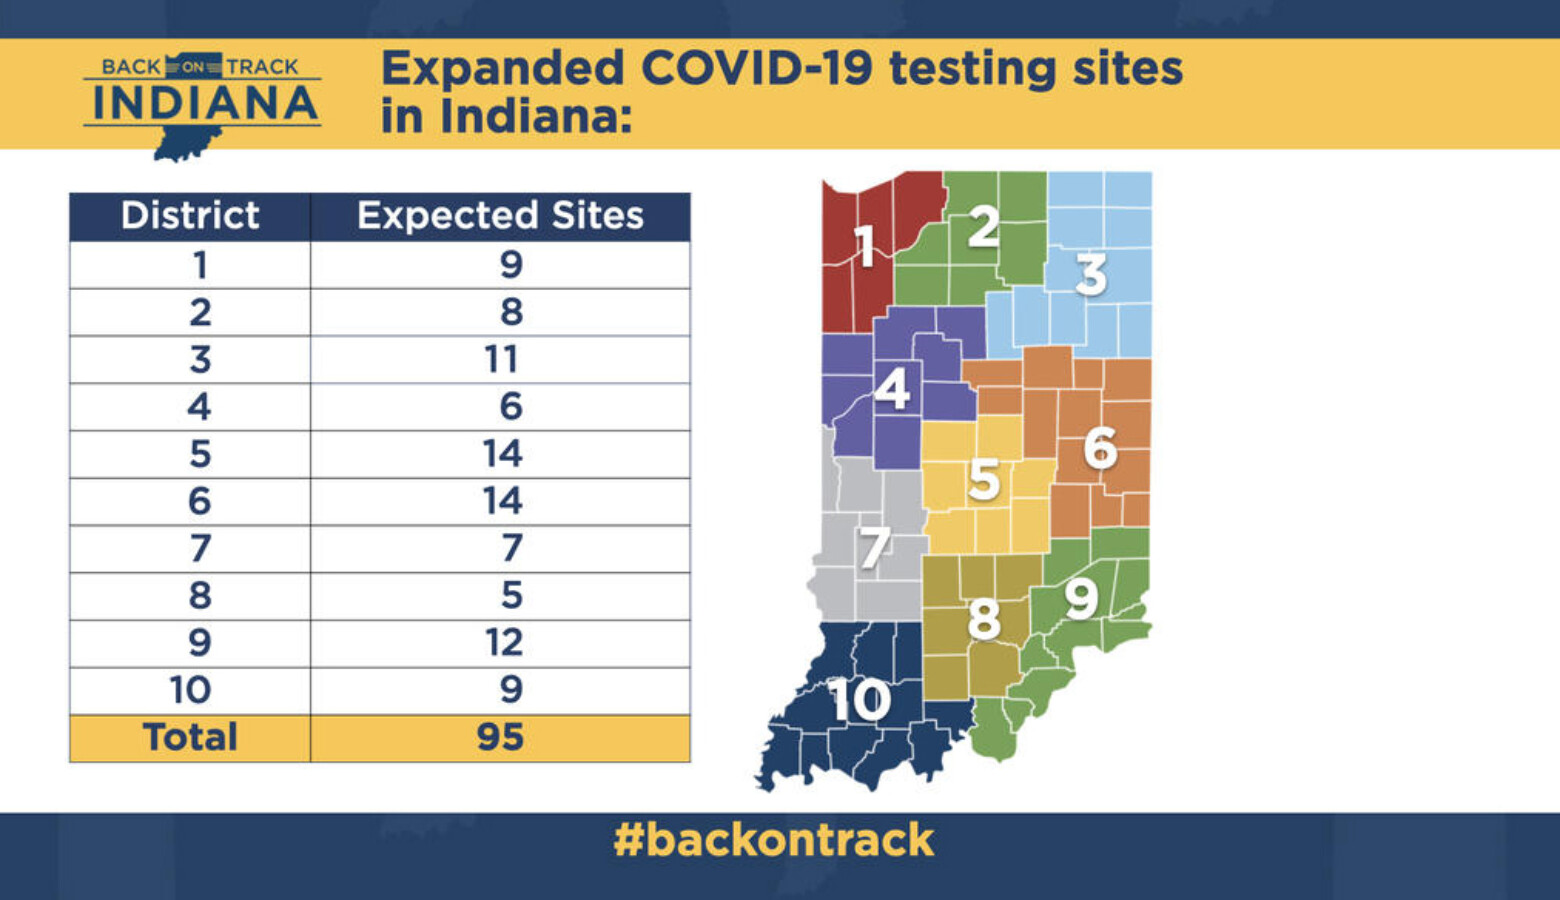 The state will provide funding to help 95 COVID-19 testing sites stay up and running for the next two years. (Courtesy of the governor's office)